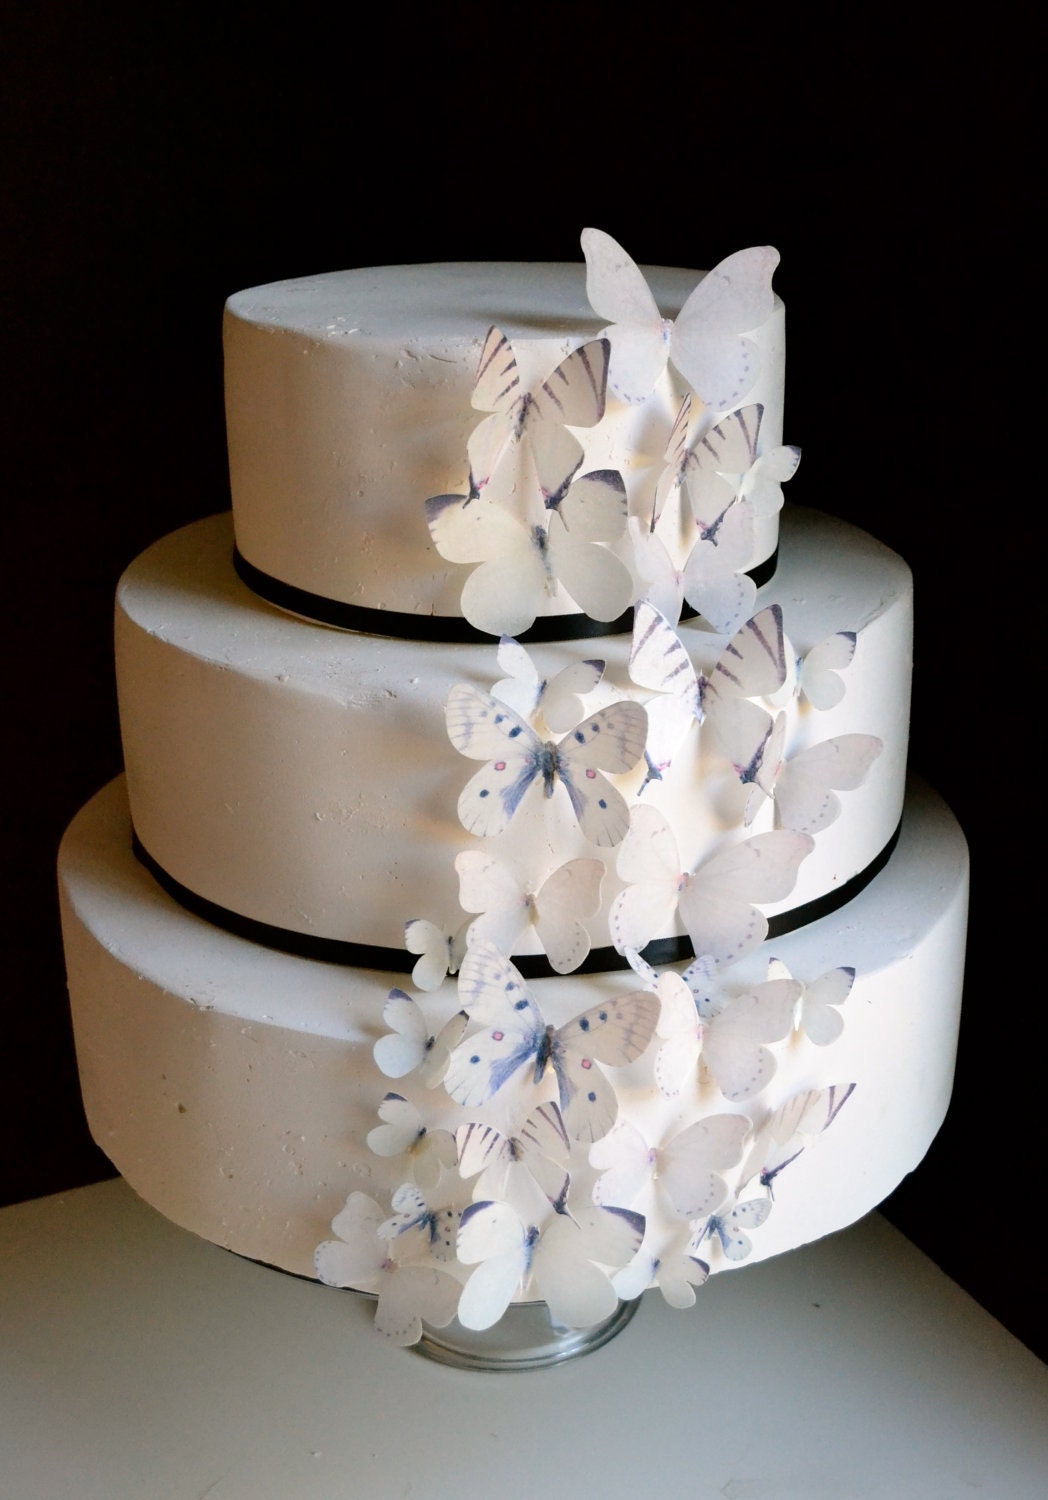 Details about   12 PRECUT Edible Double White Butterfly wafer/rice paper cake/cupcake toppers 1 